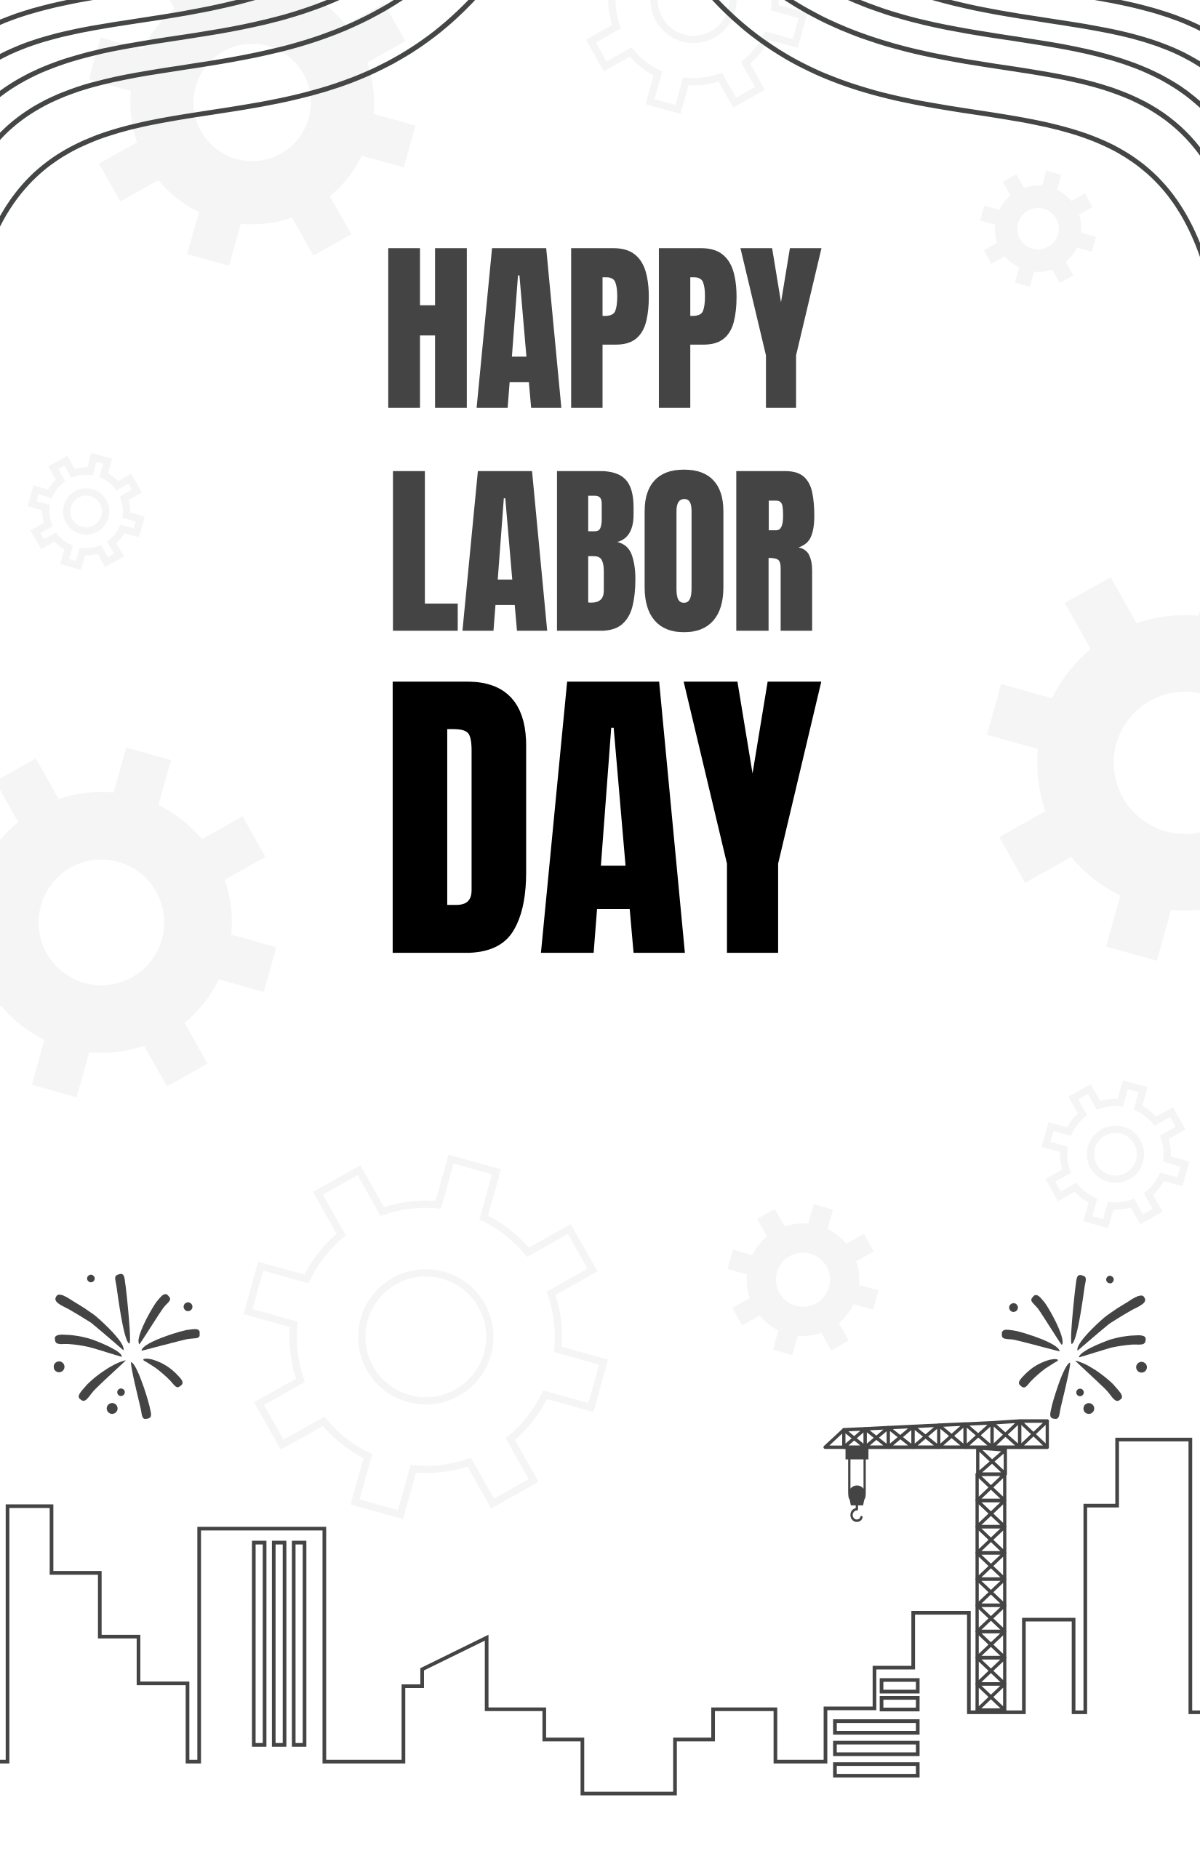 Labour day Poster Drawing